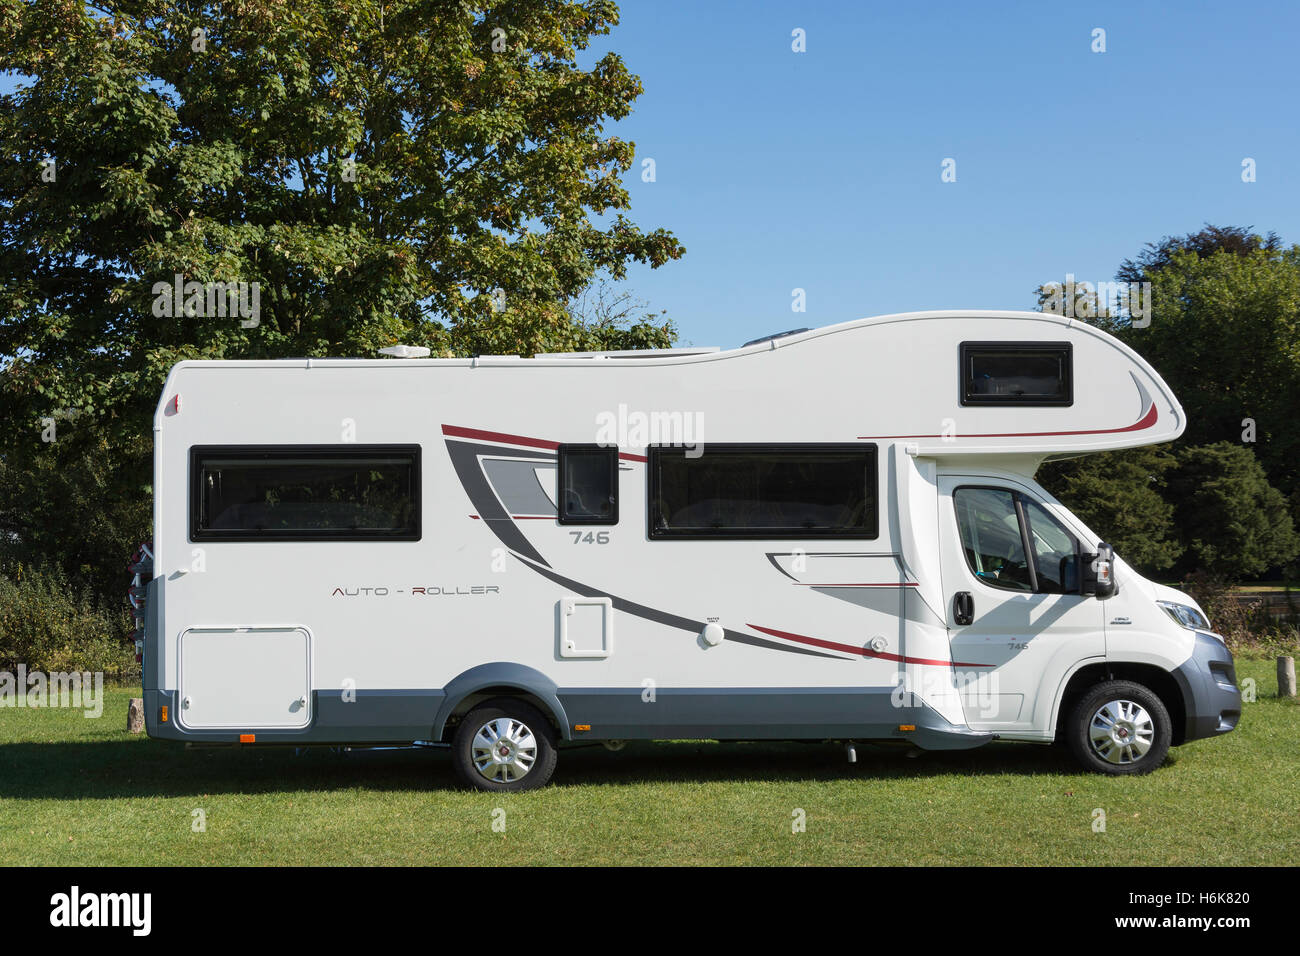 Auto-Roller 746 - Rollerteam camping par Tamise, Runnymede, Surrey, Angleterre, Royaume-Uni Banque D'Images